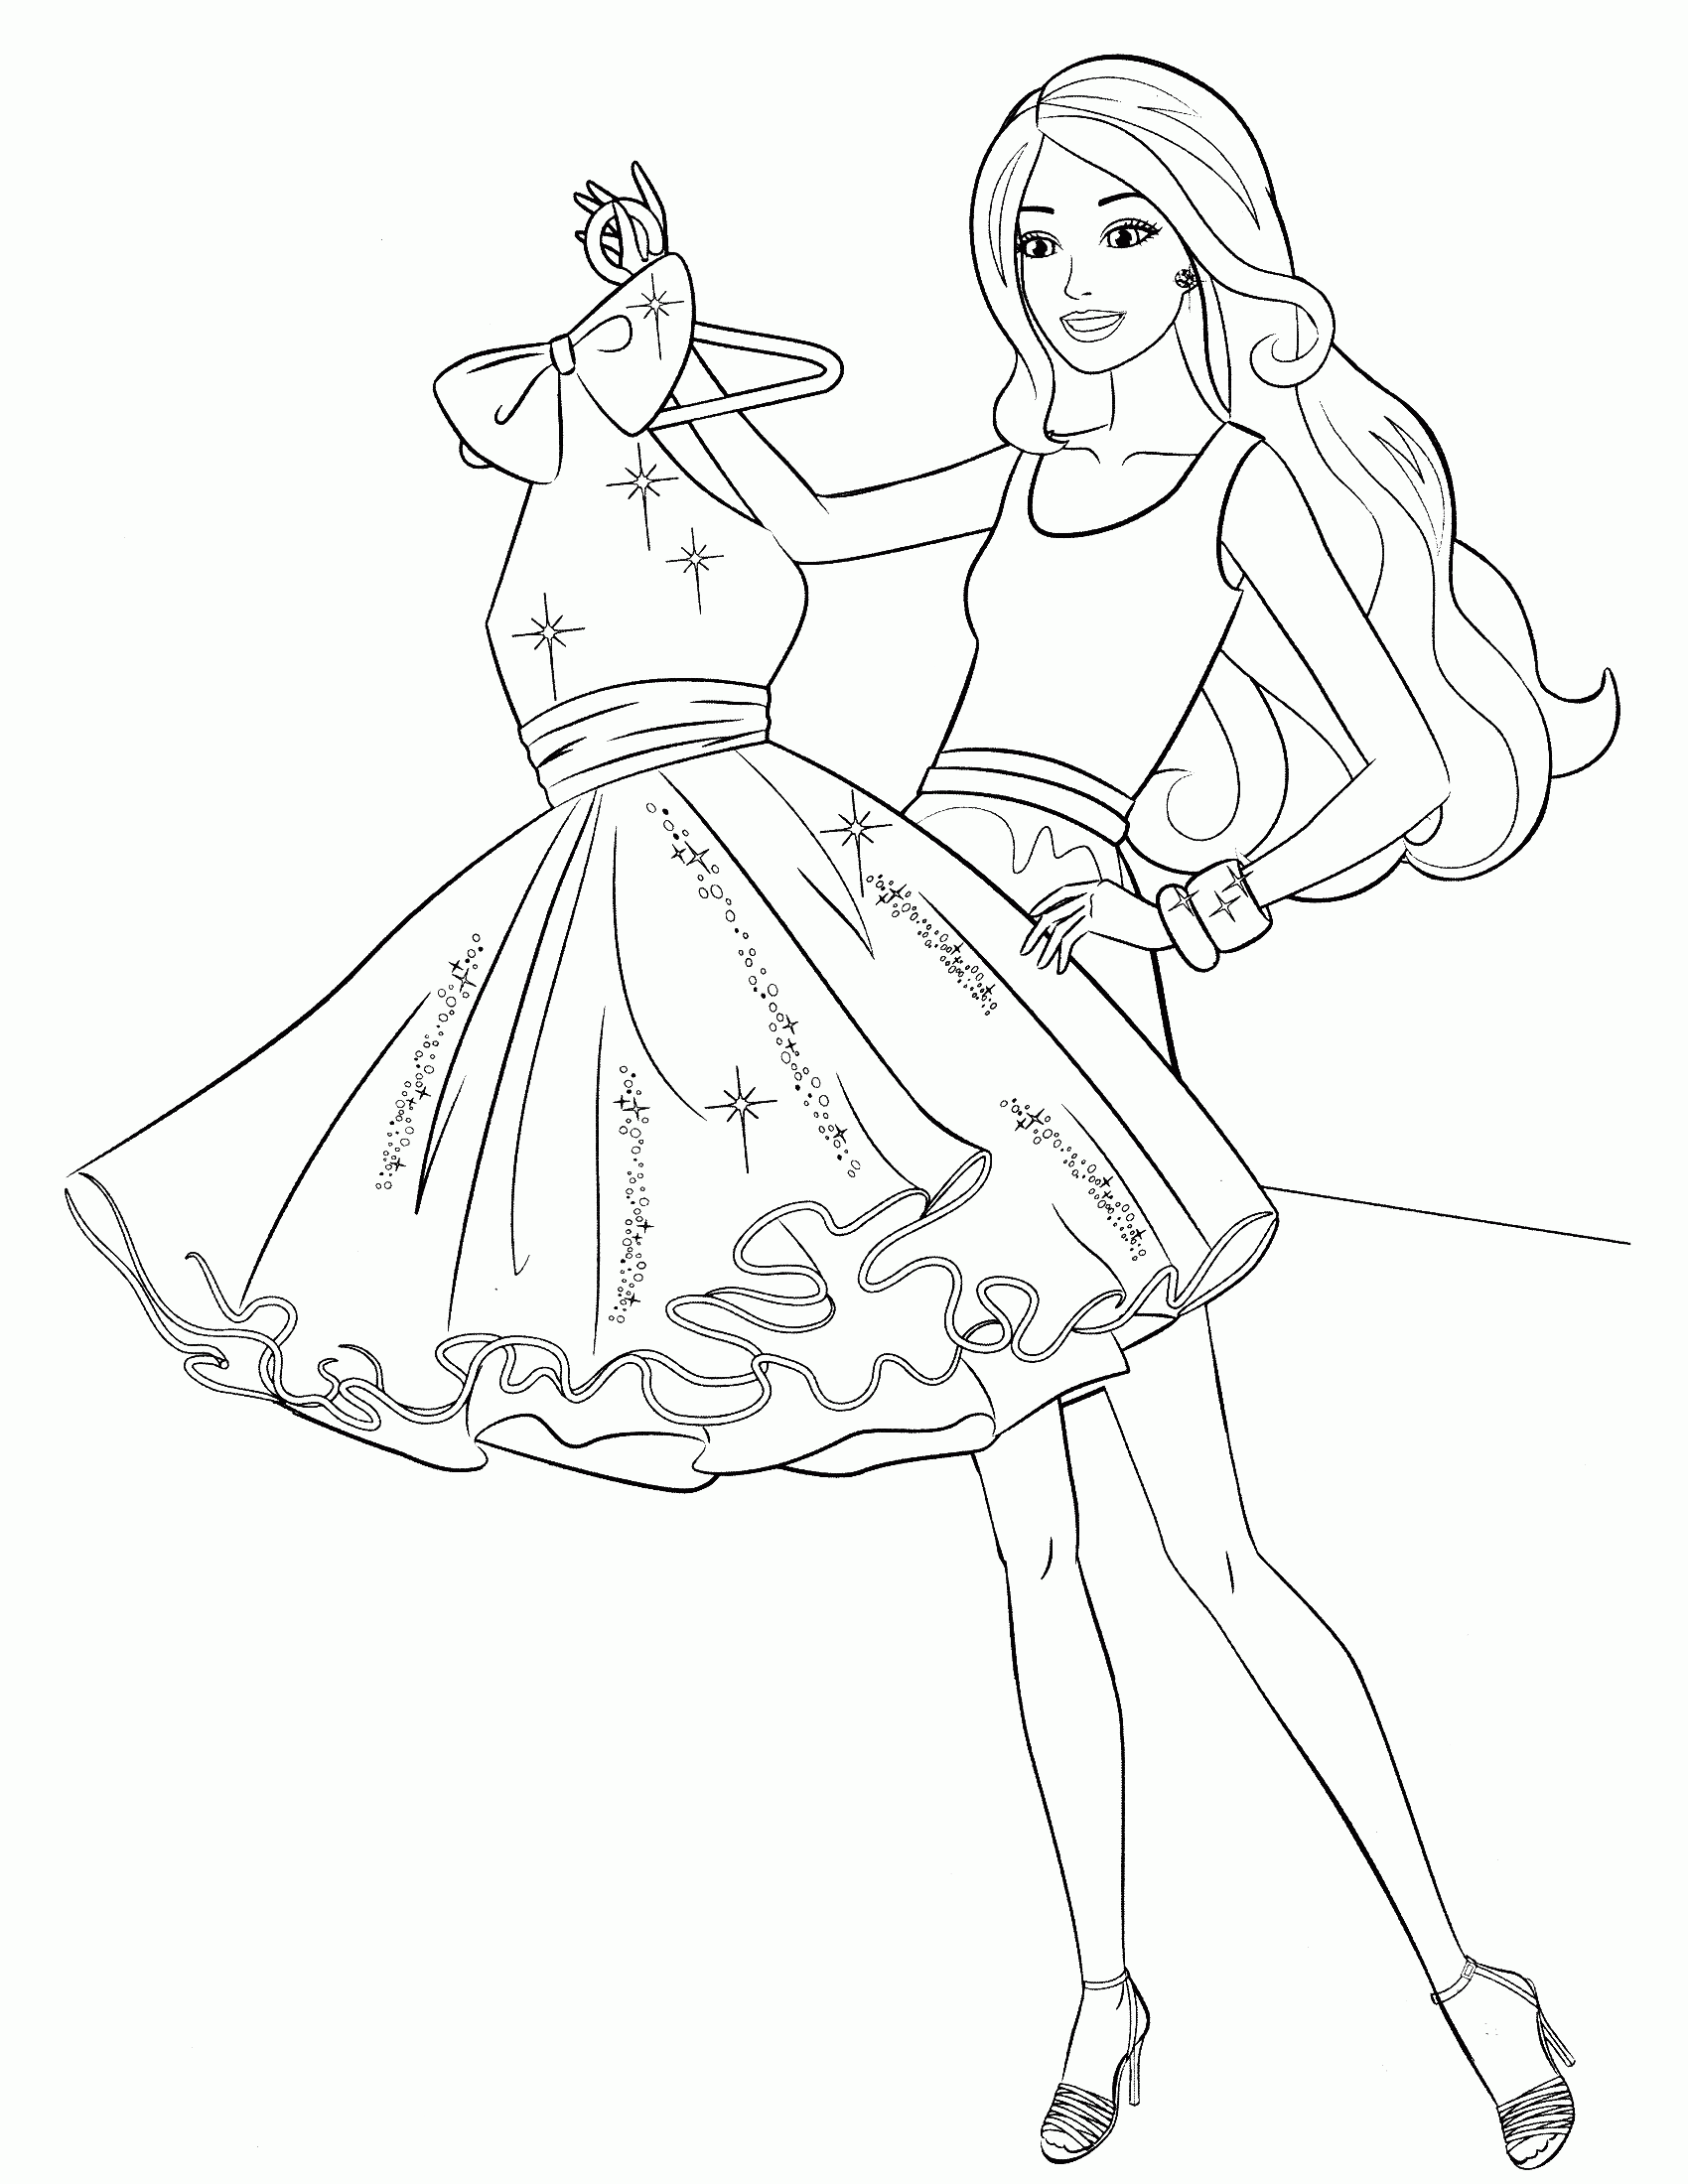 Barbie Coloring Books - Coloring Pages for Kids and for Adults